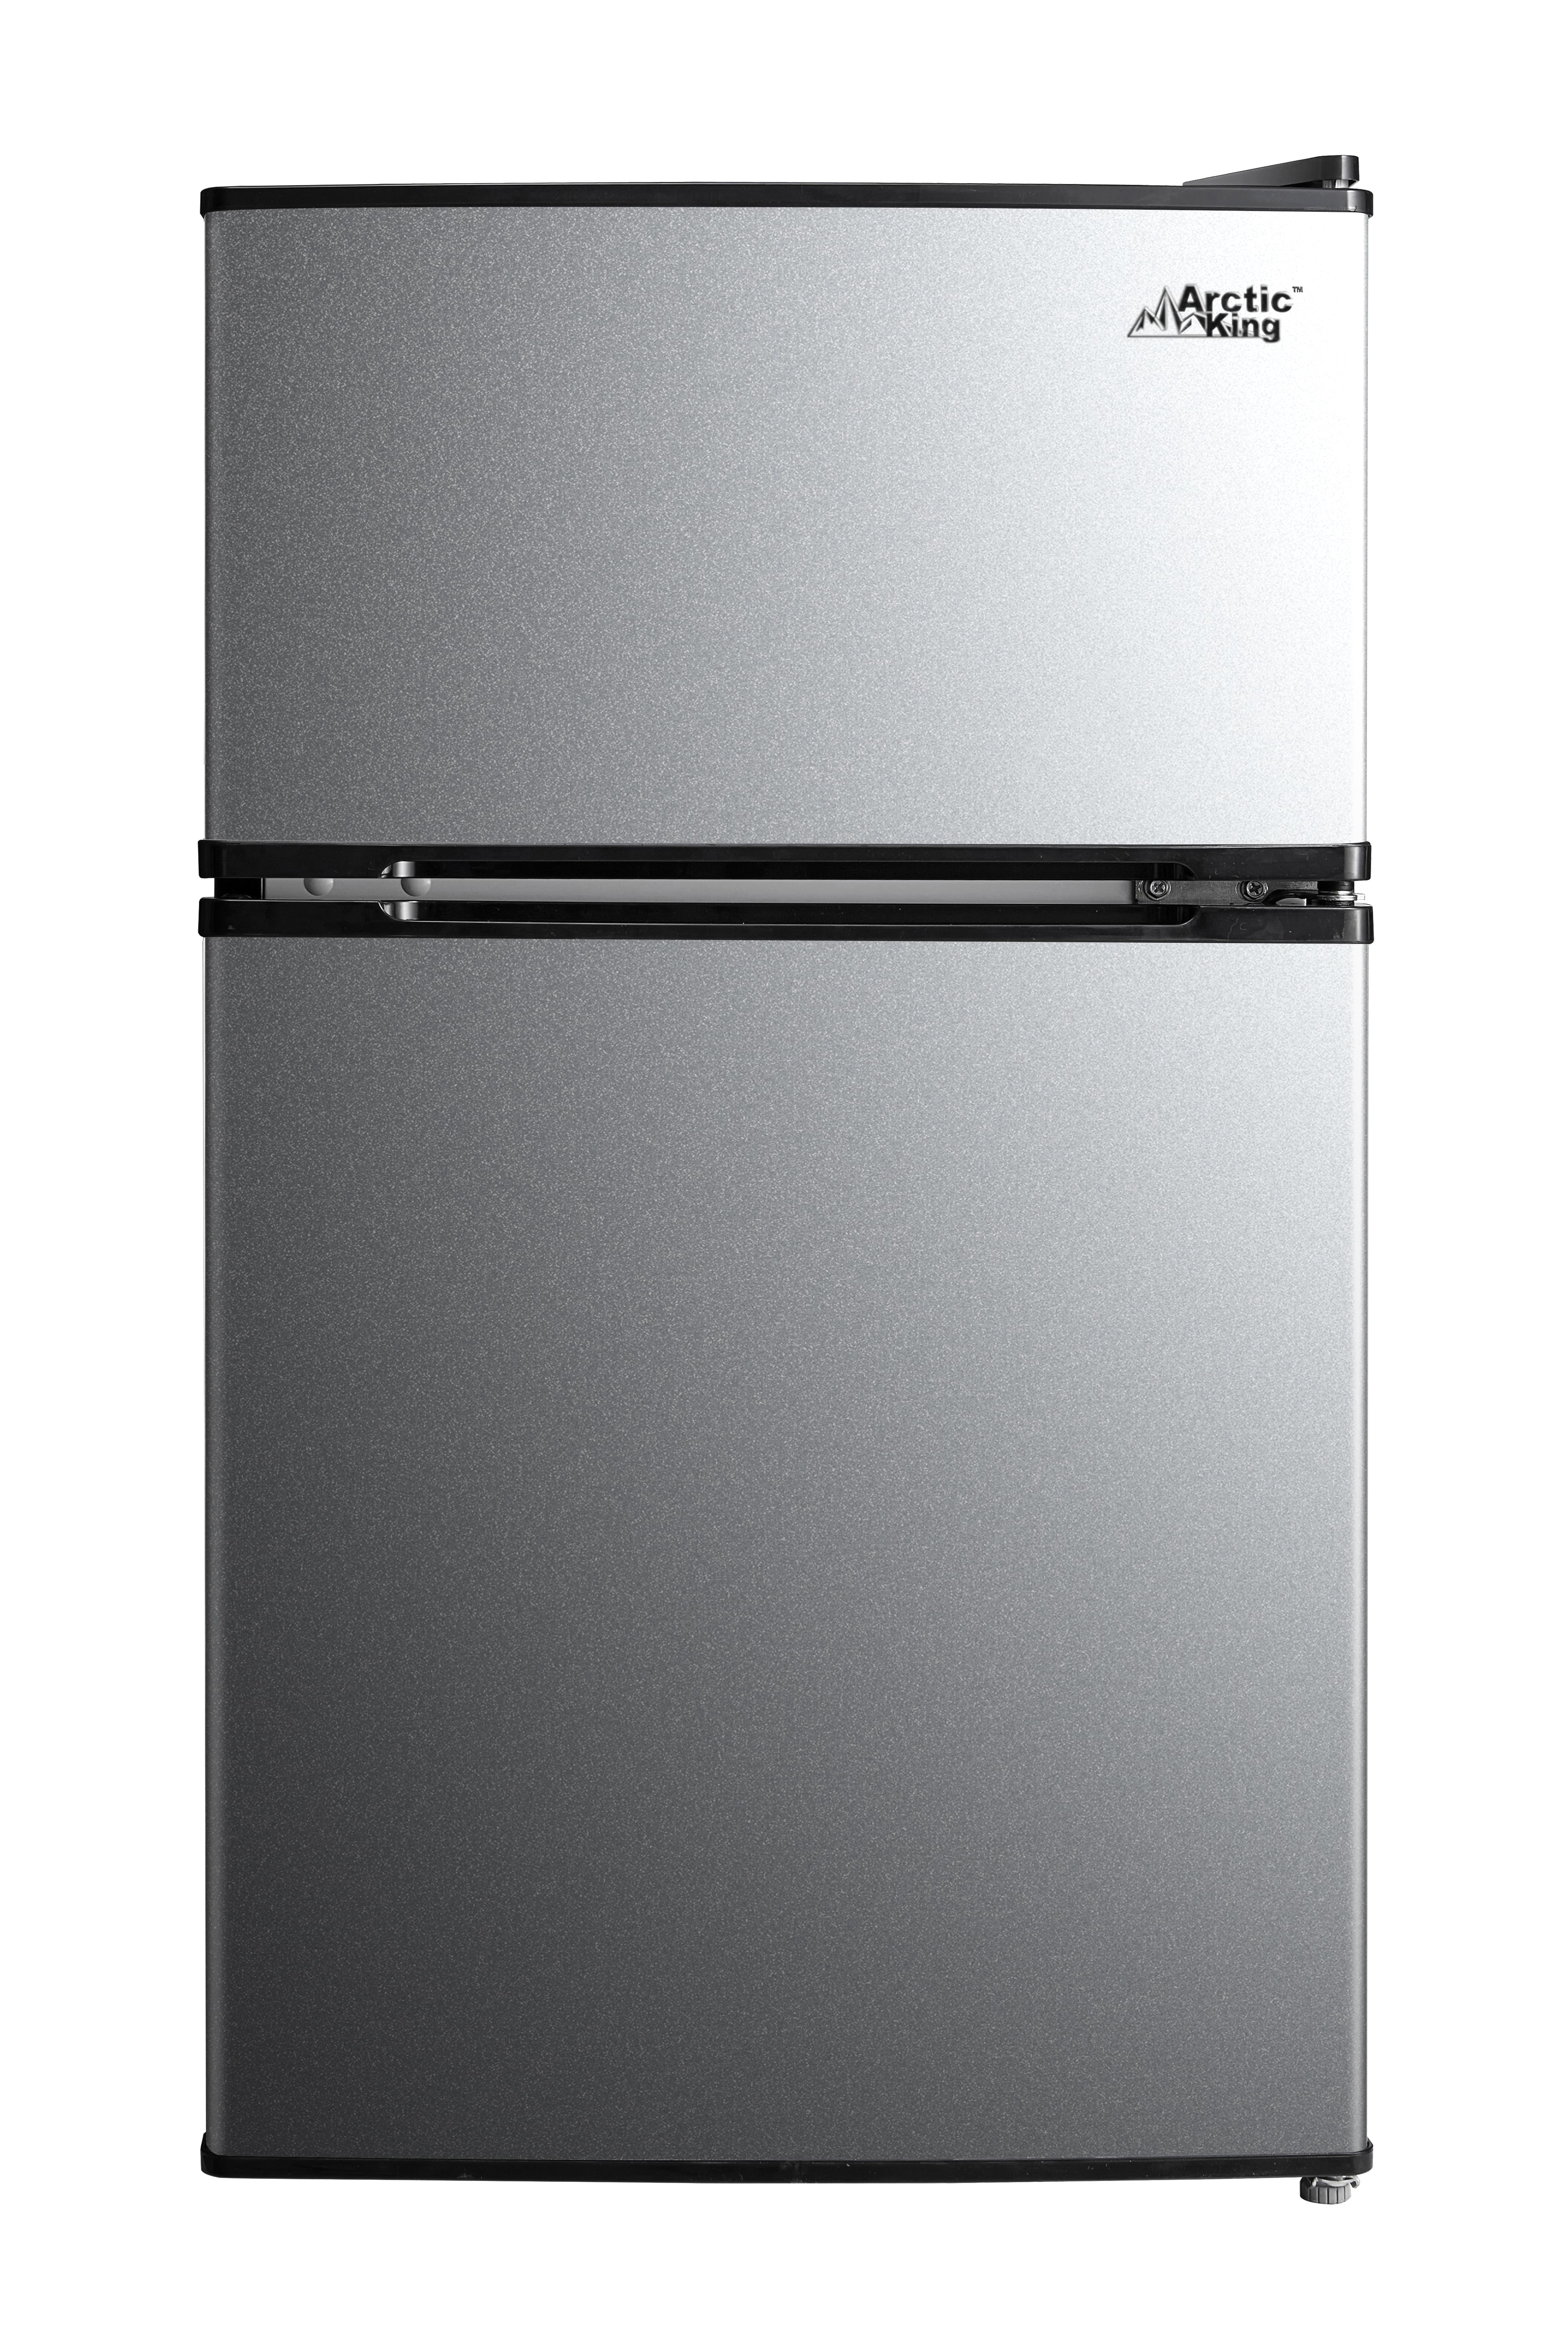 Arctic King 3.2 Cu ft Two Door Mini Fridge with Freezer, Stainless Steel, E-Star, ARM32D5ASL - image 1 of 21